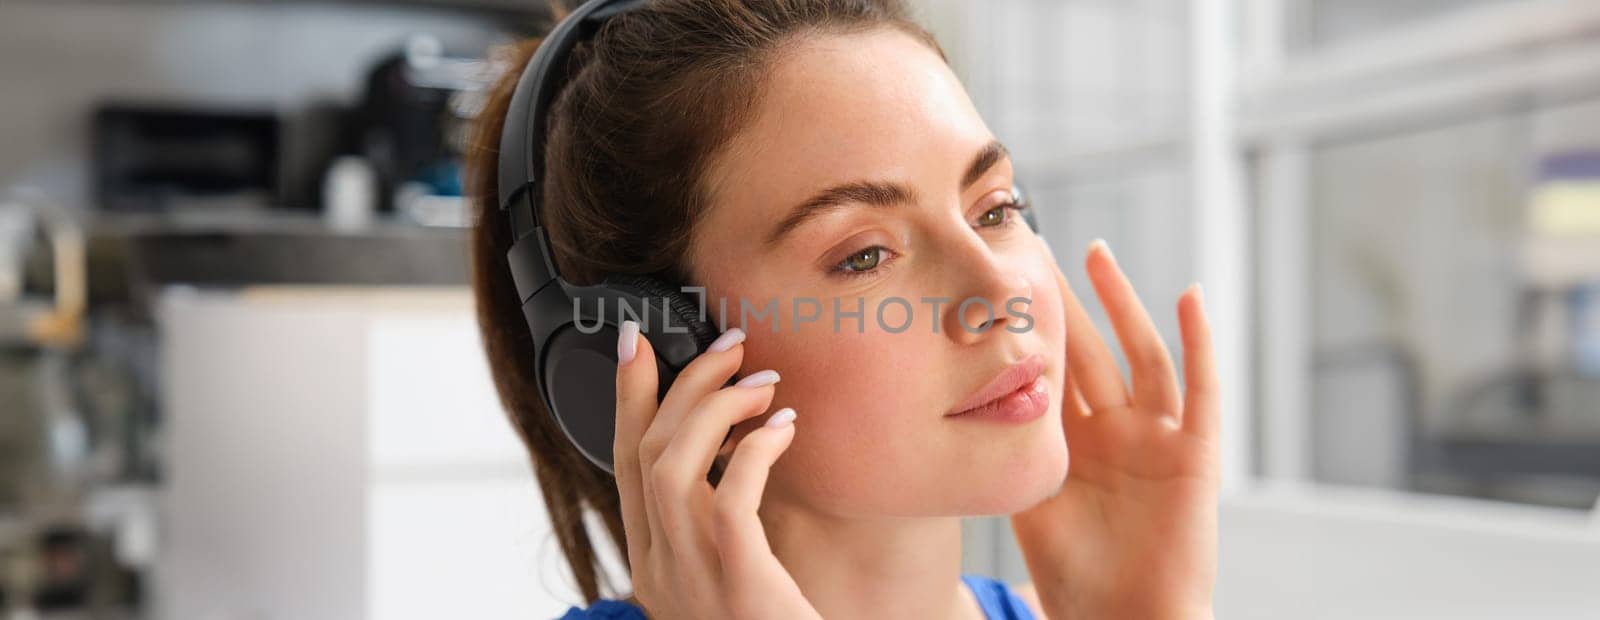 Close up portrait of fitness woman, smiling and listening music, wearing wireless black headphones.